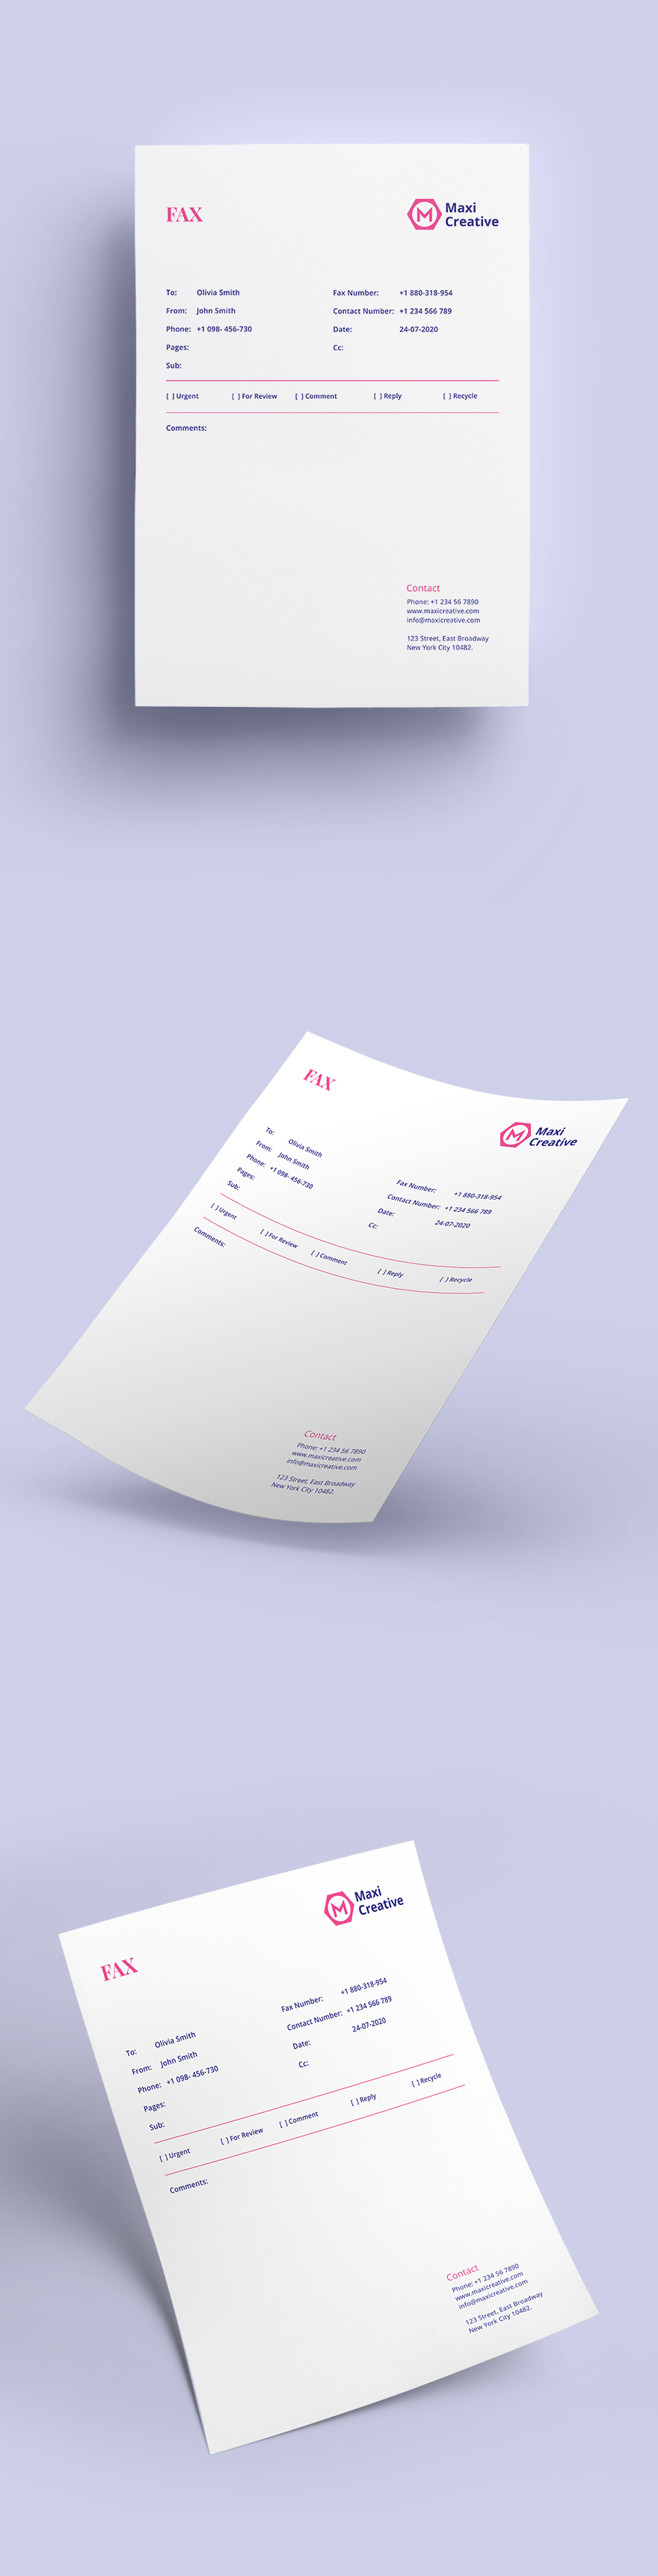 Free Creative Agency Fax Paper Template